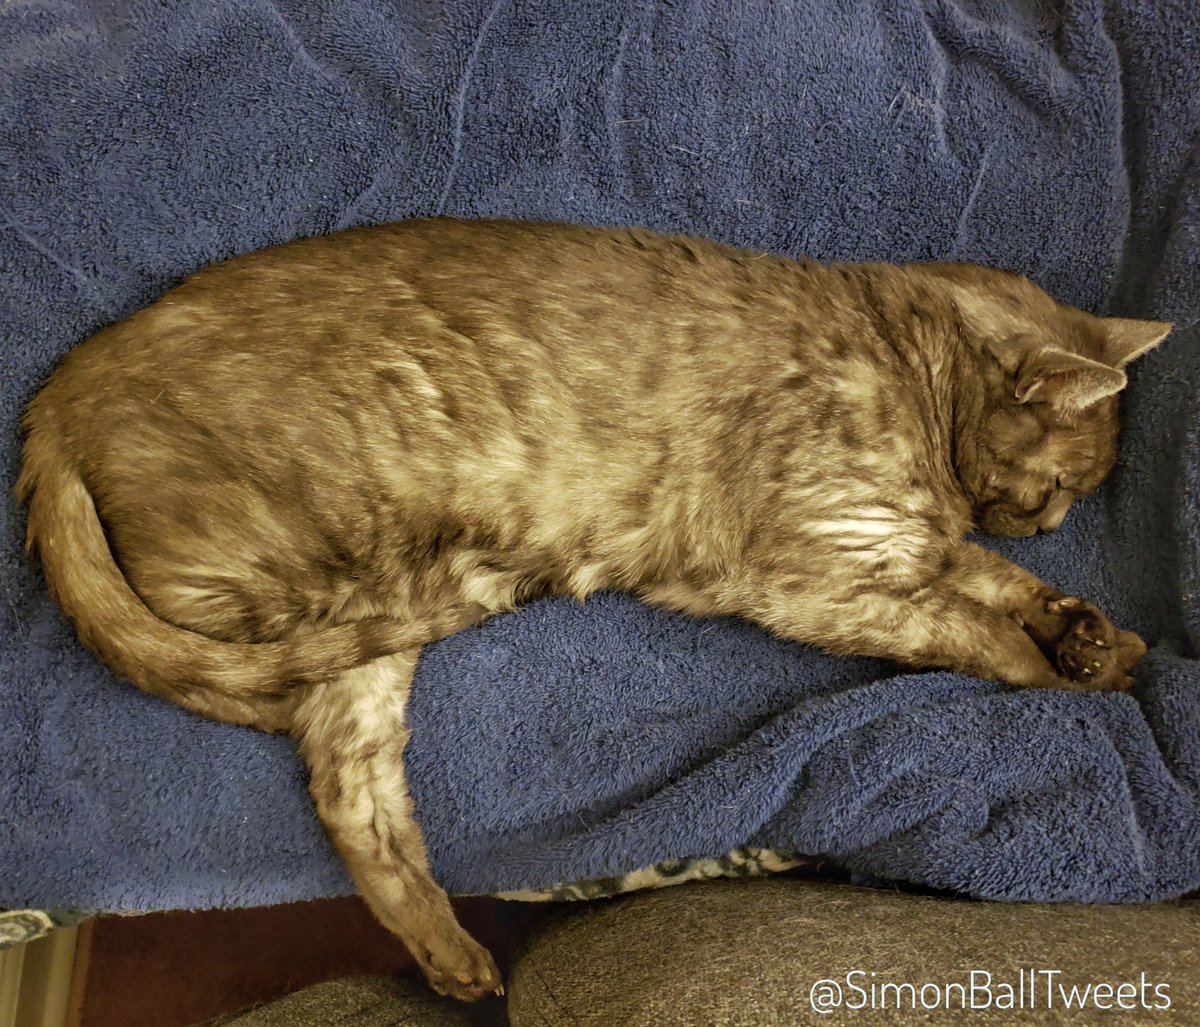 Always remember to put your kickstand down before napping.

#catadvice #mondaythoughts